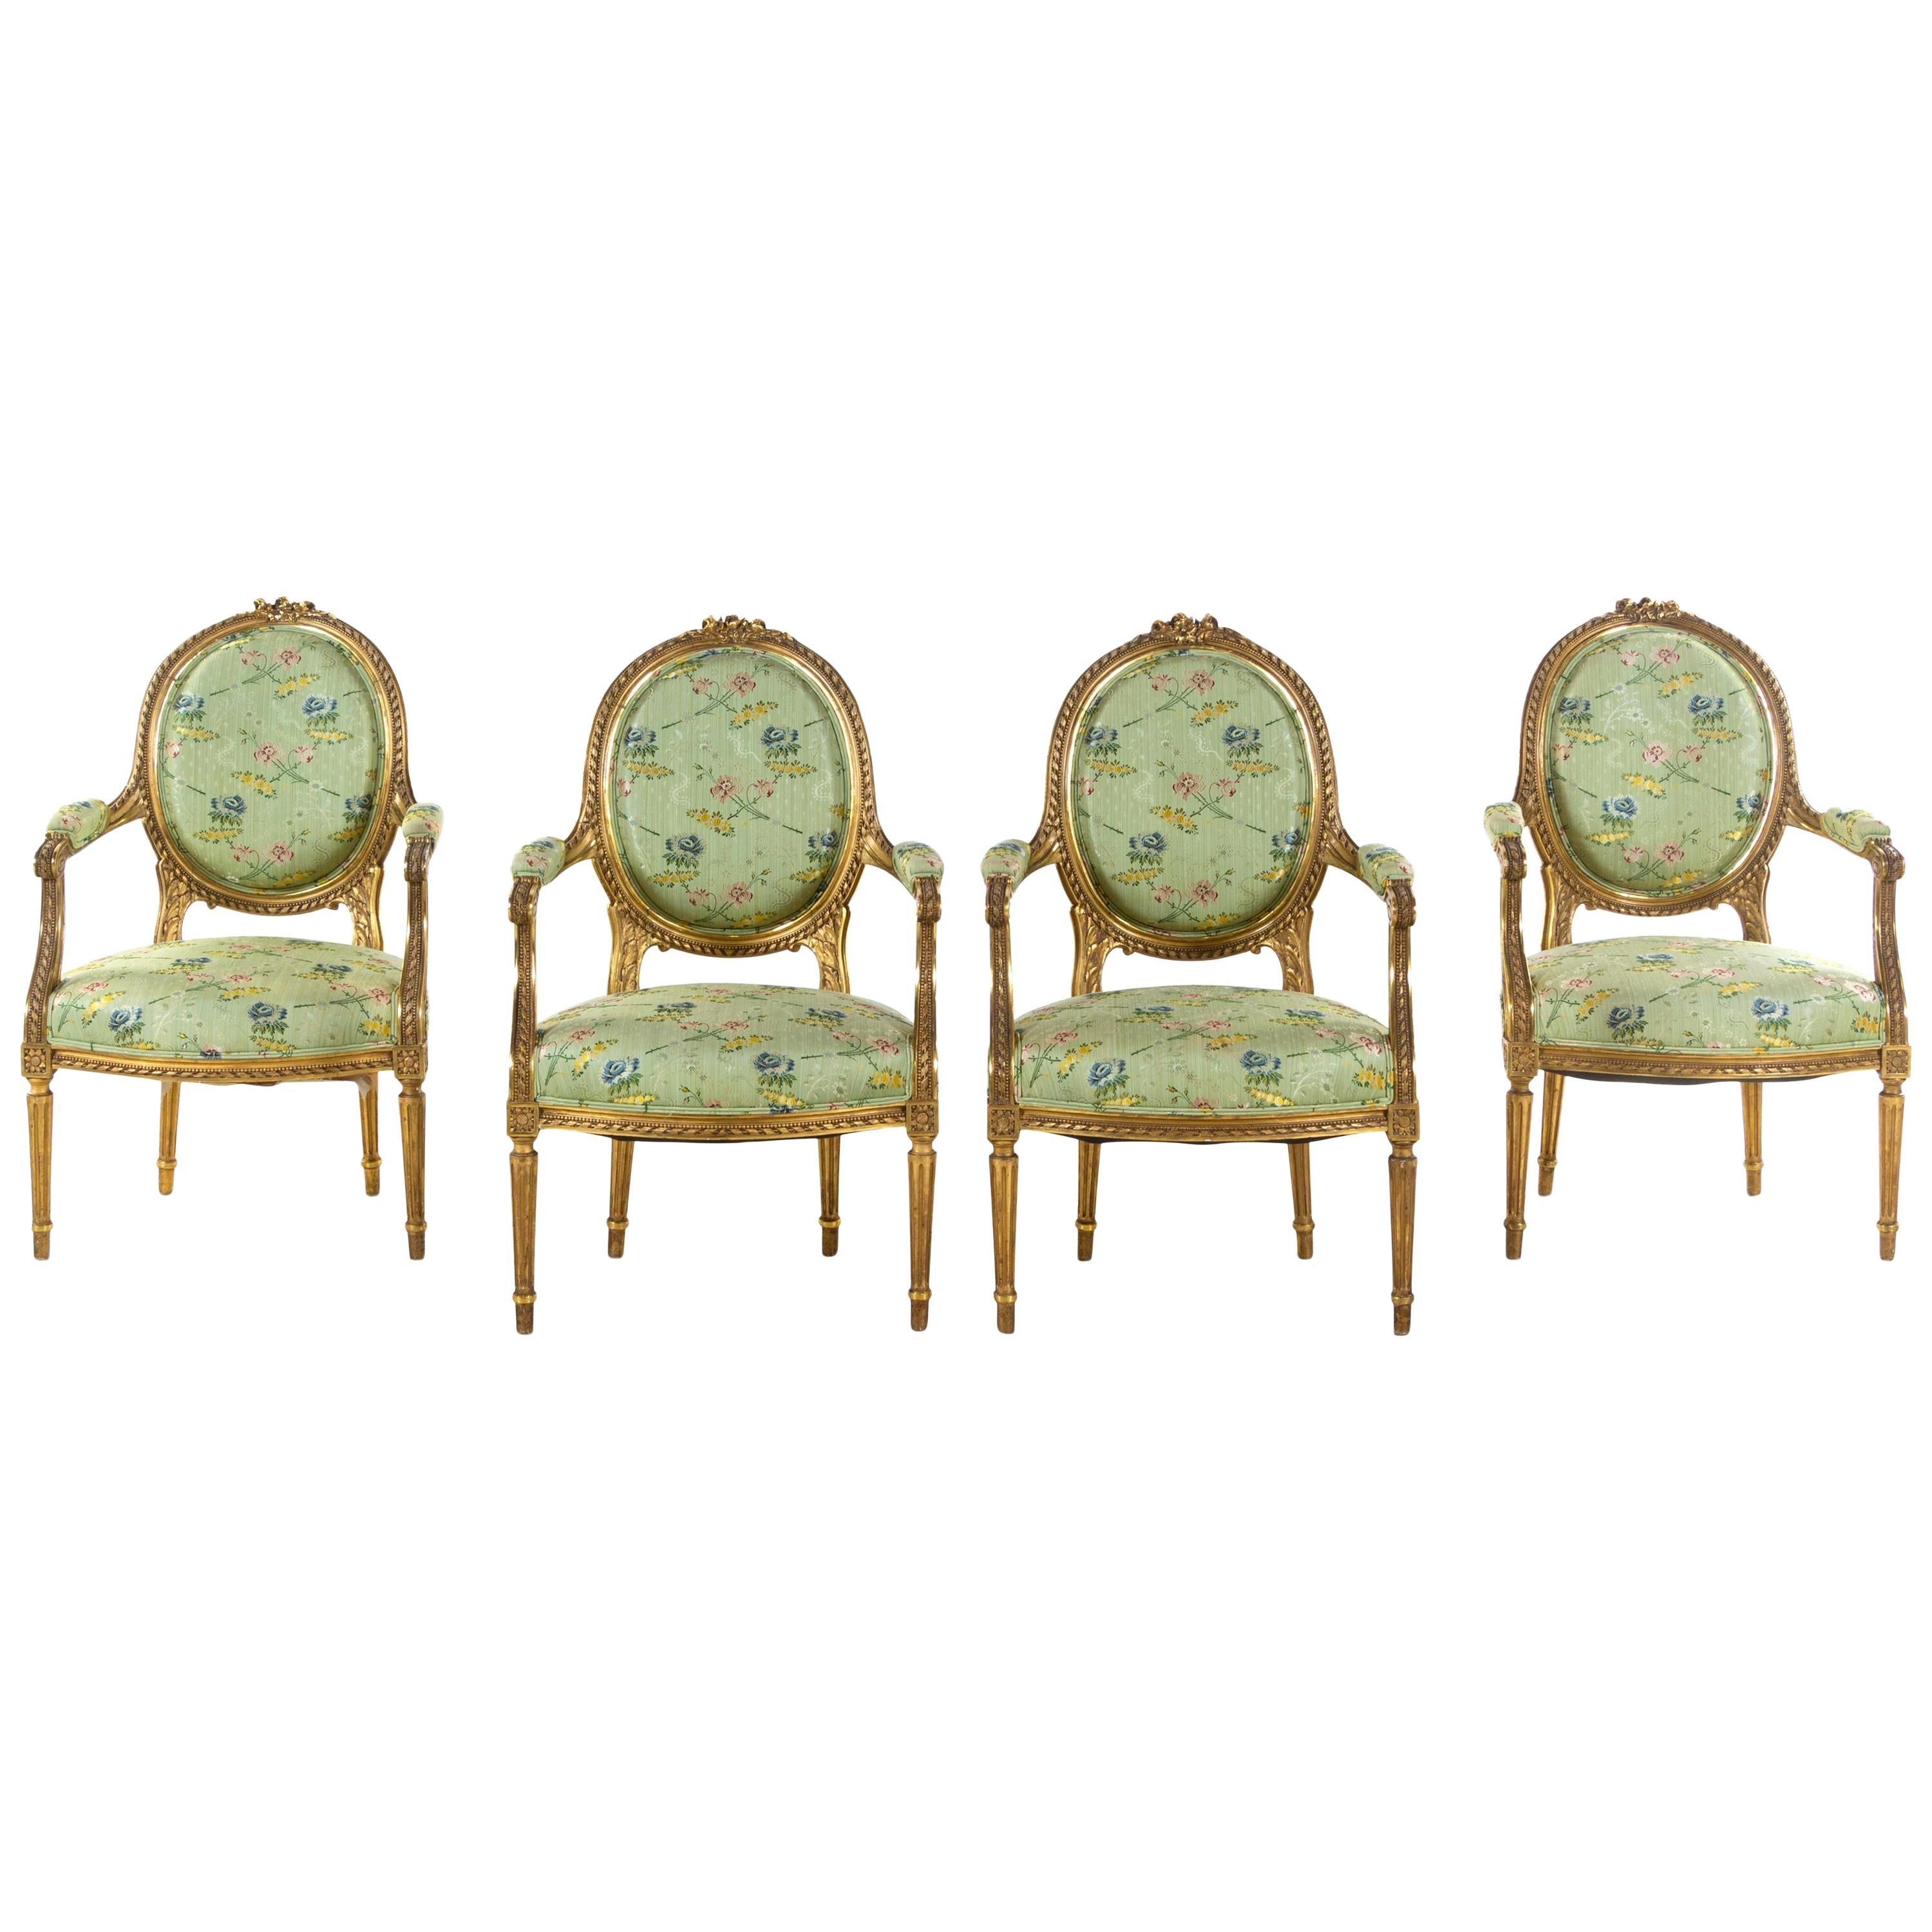 Set of 4 Early 19th Century French Louis XVI Giltwood Oval Back Armchairs